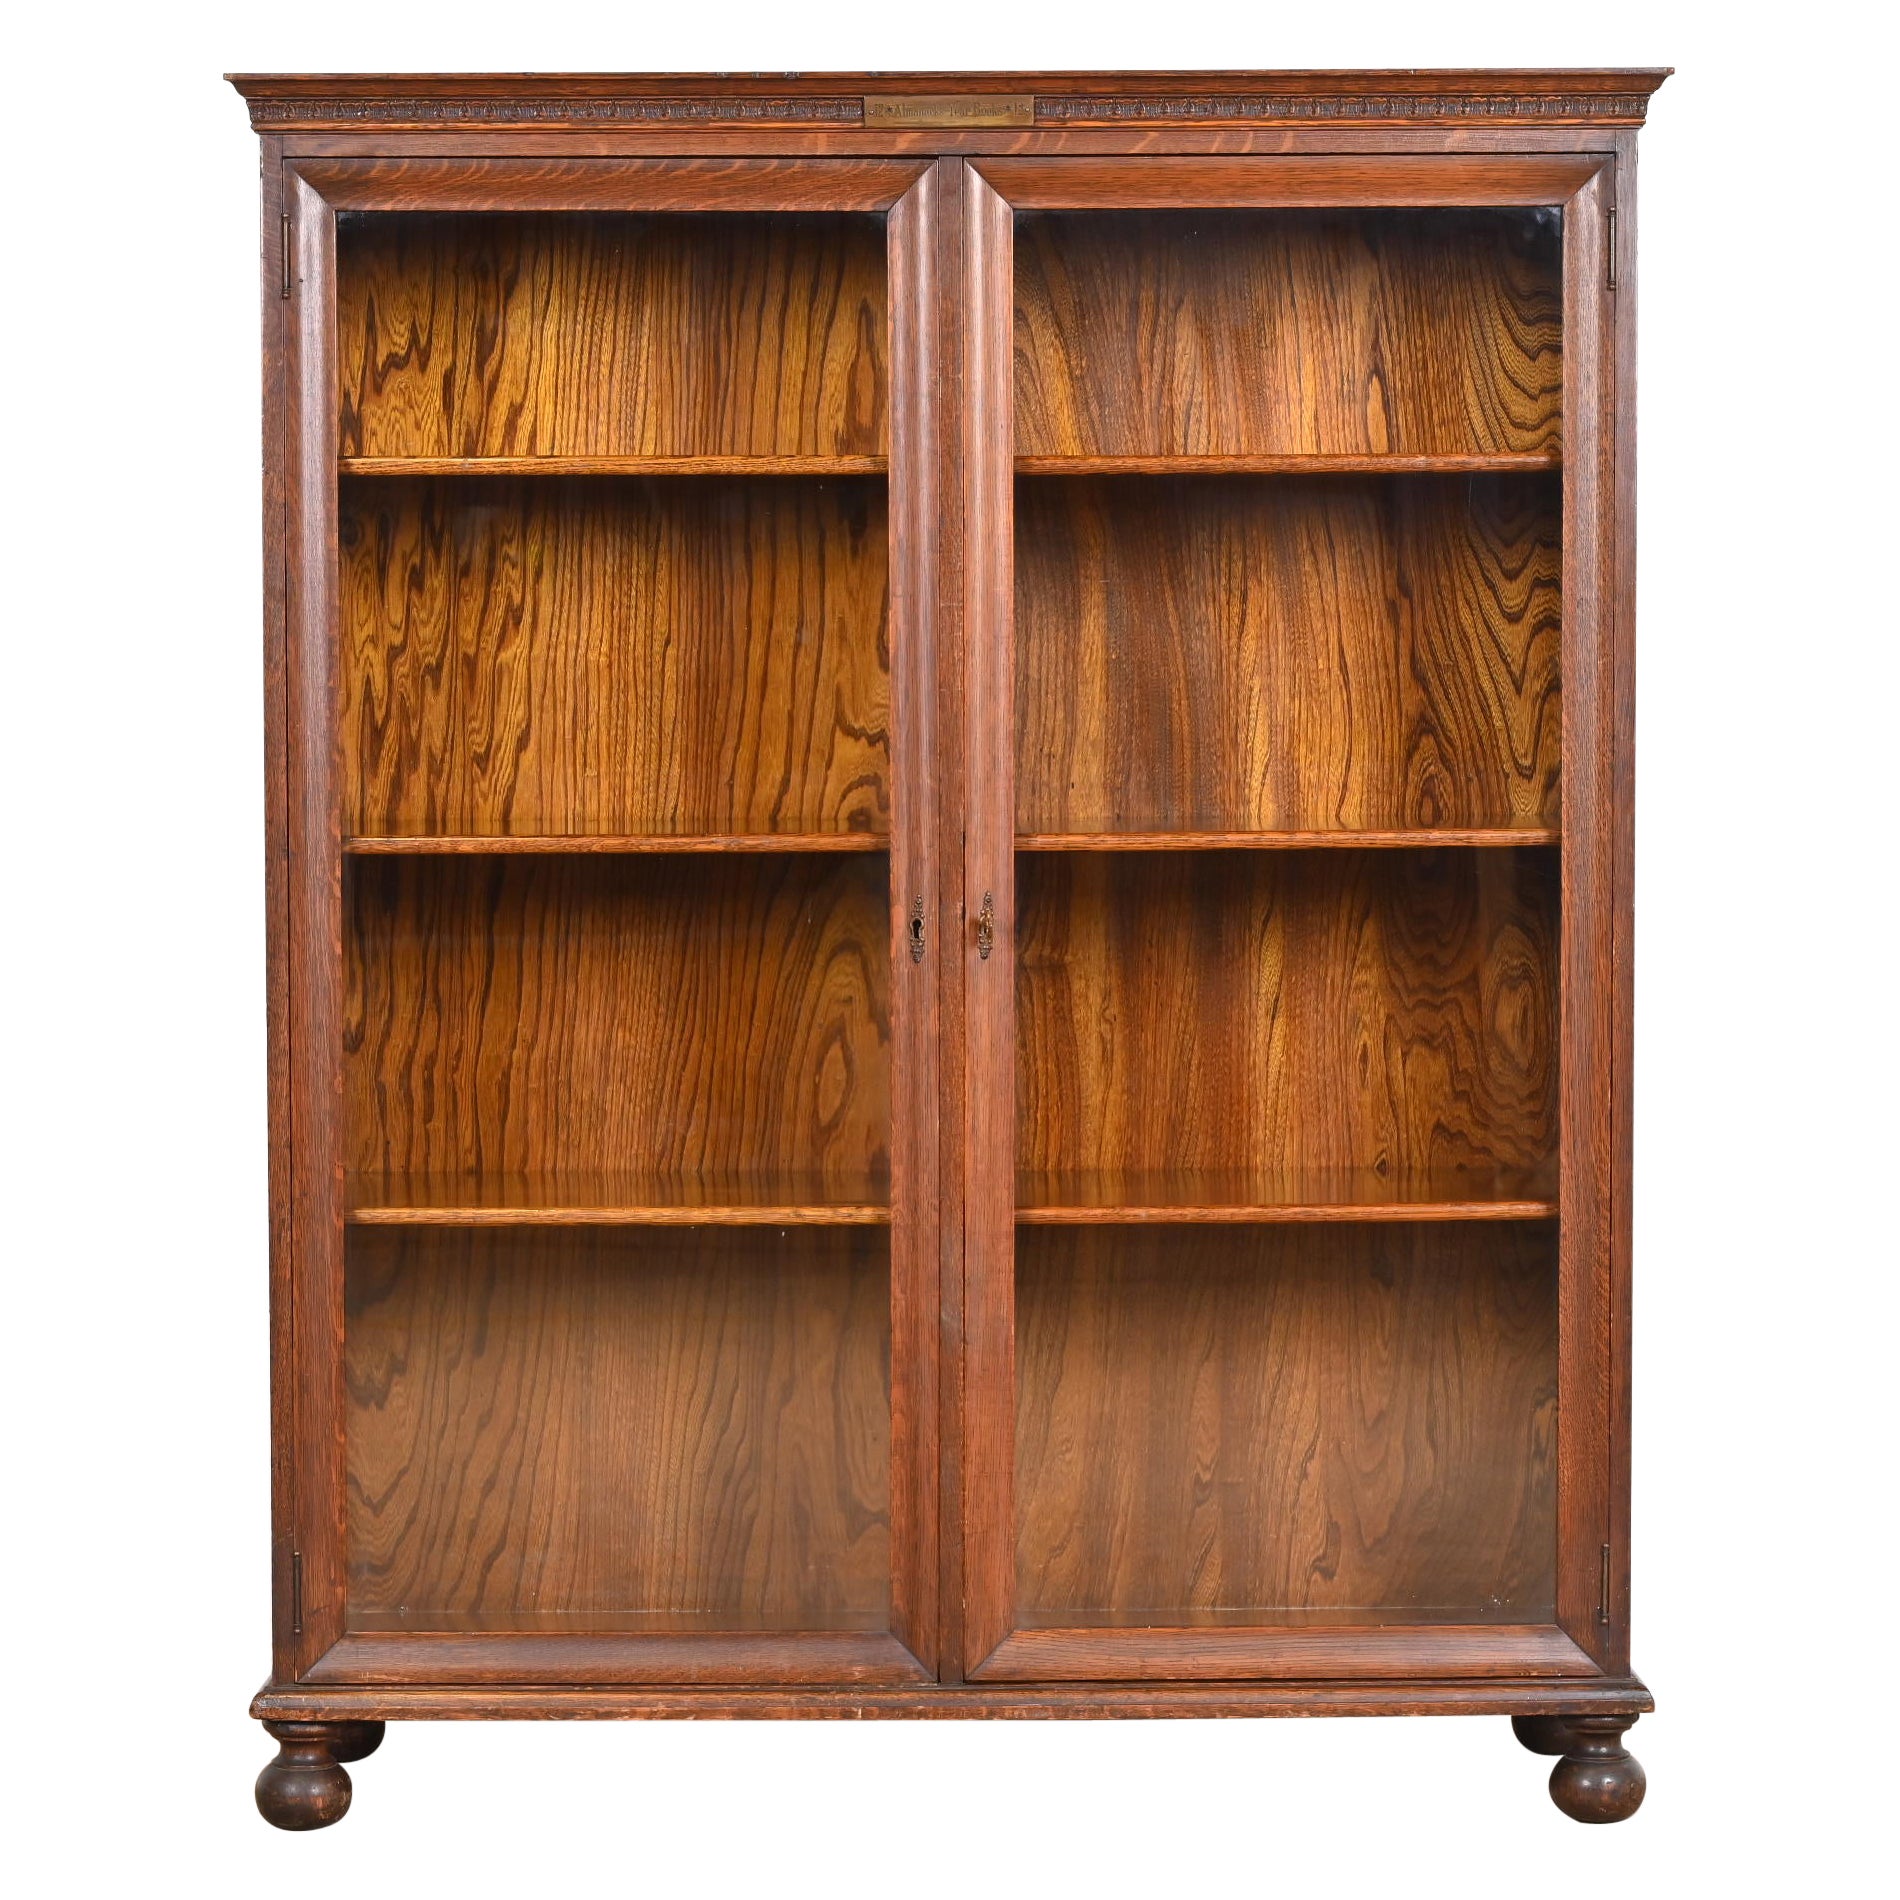 Antique Arts & Crafts Carved Oak Glass Front Double Bookcase, circa 1900